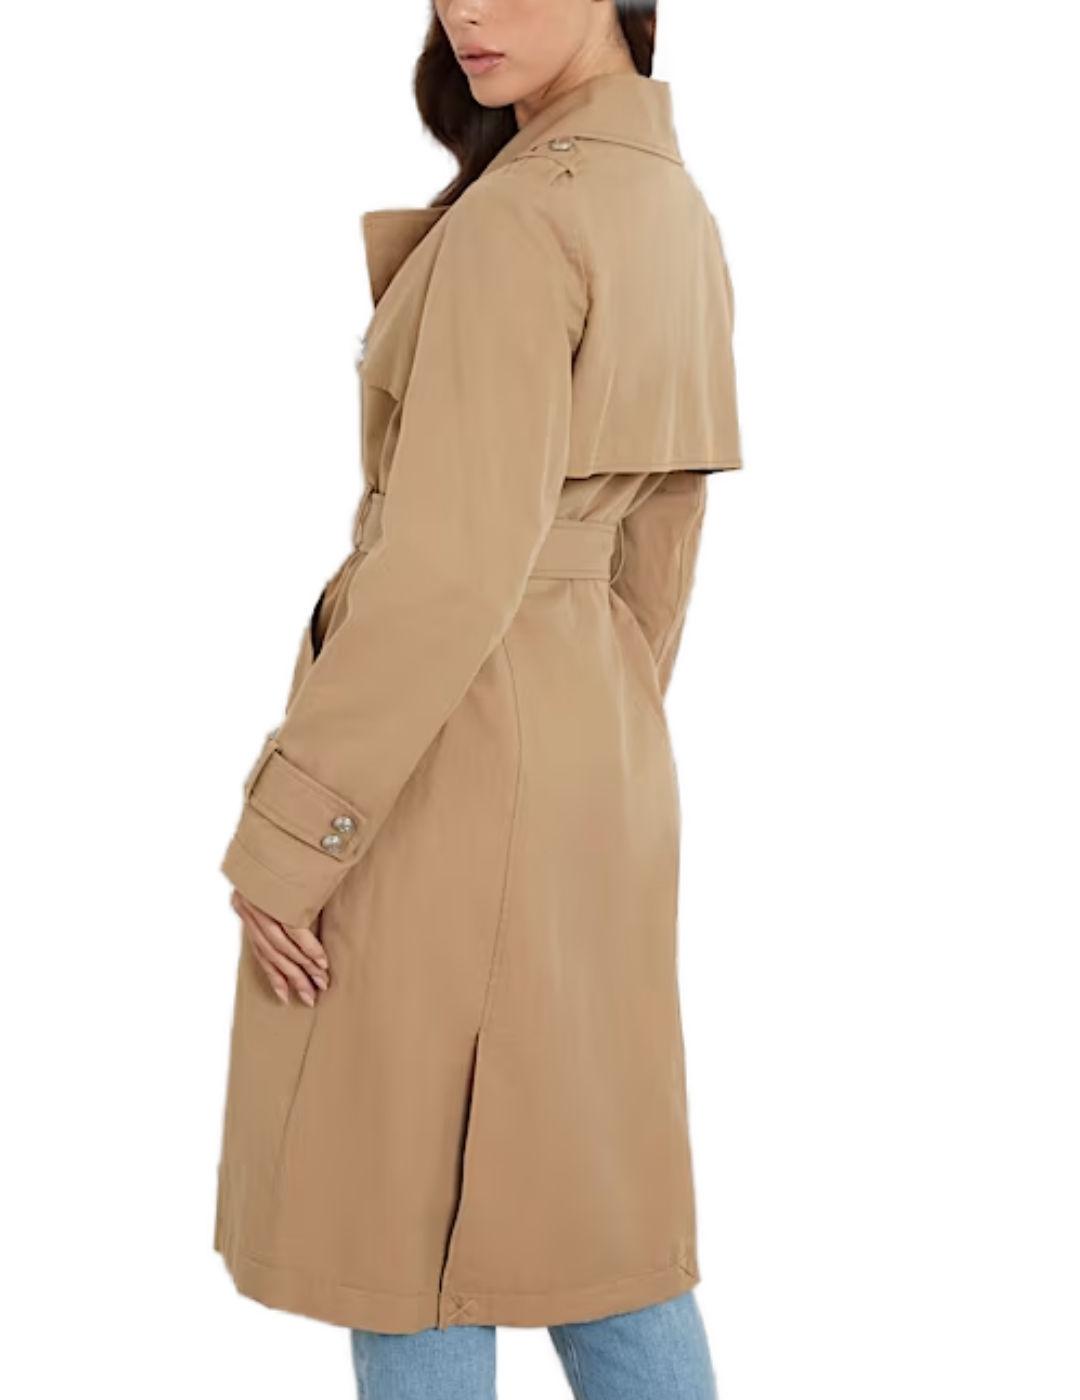 Chaqueta trench Guess Jade beige clásica para mujer